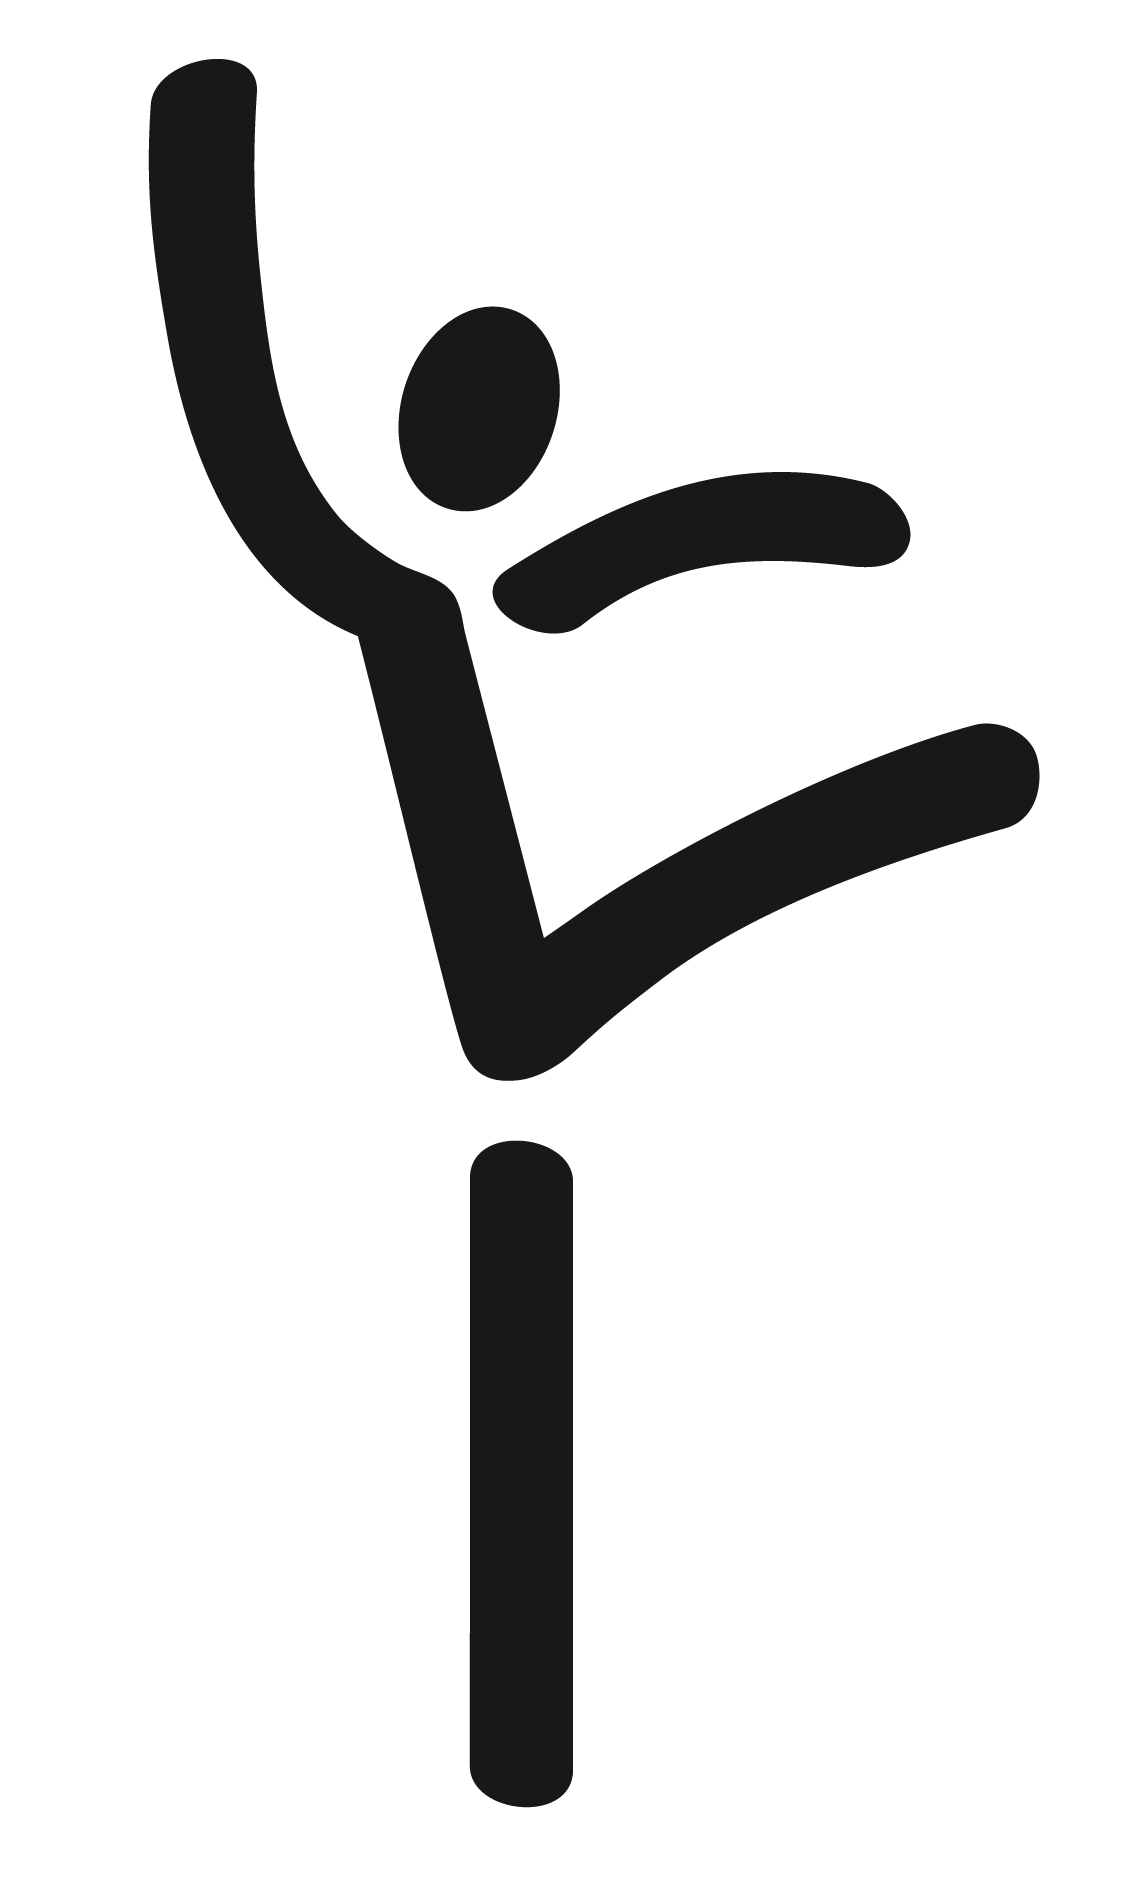 Gymnastics clipart olympic gymnastics. Sports offered special olympics